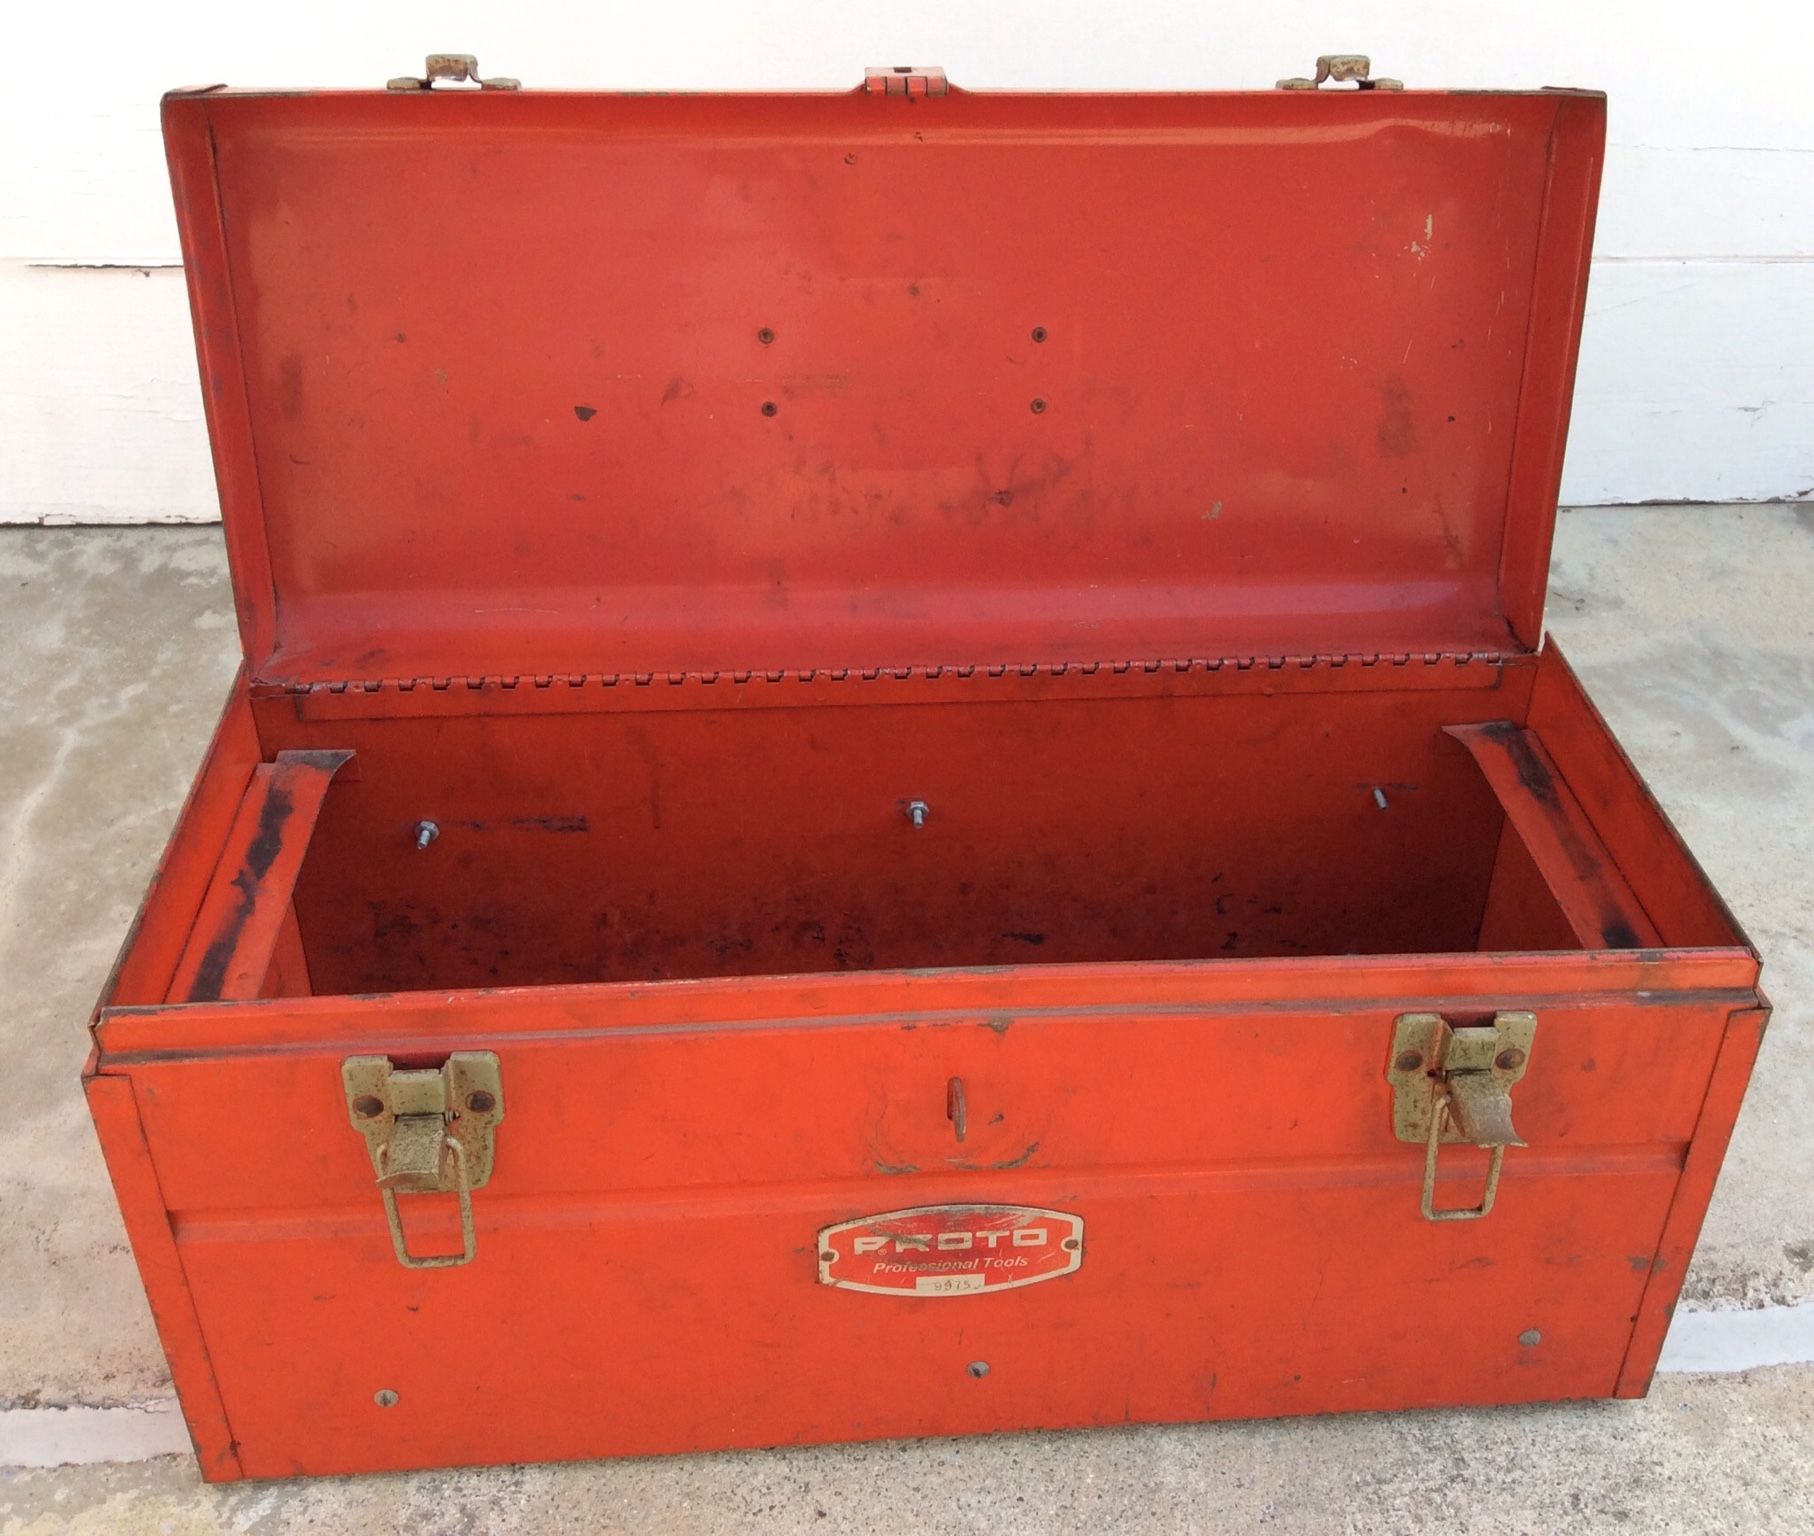 PROTO 9975 RED METAL TOOLBOX TOOL BOX CHEST WITH TRAY